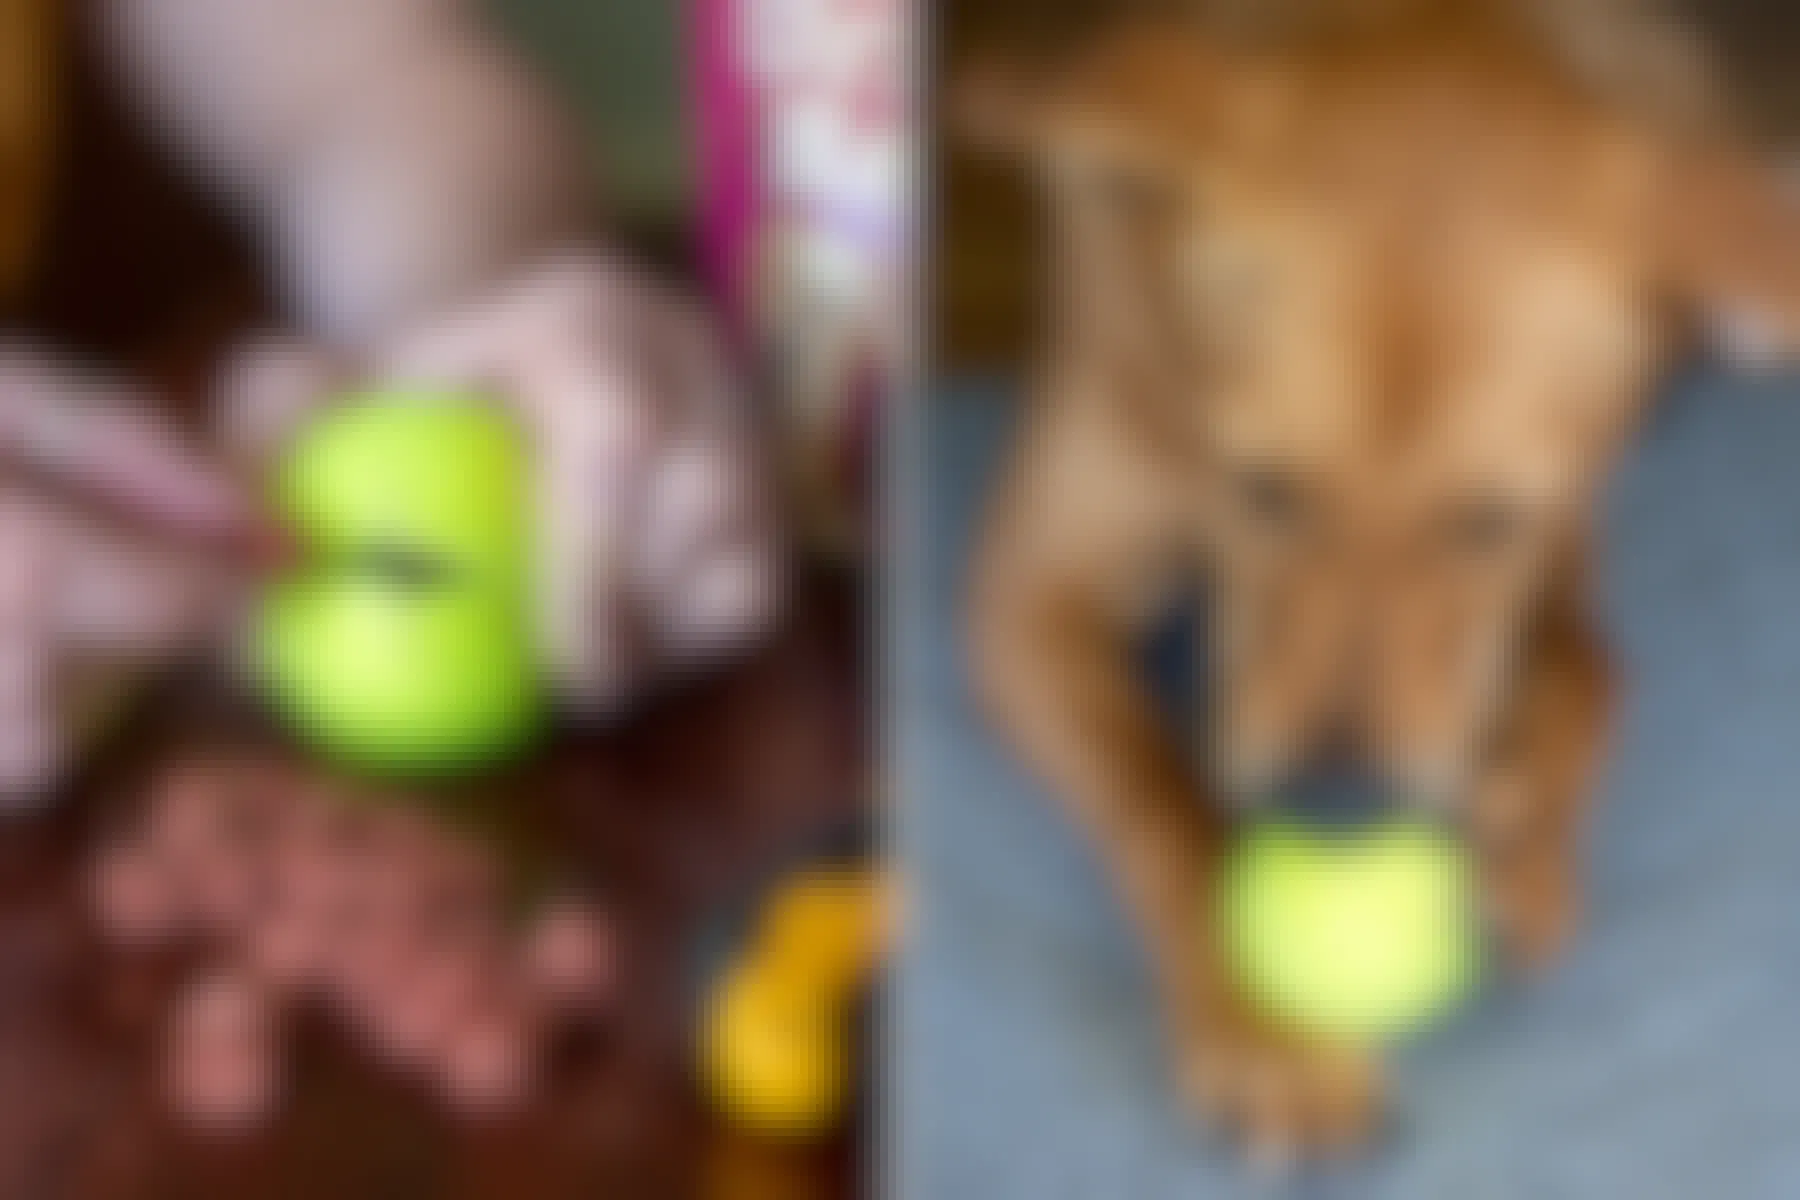 Repurpose an old tennis ball by turning it into a treat dispenser.